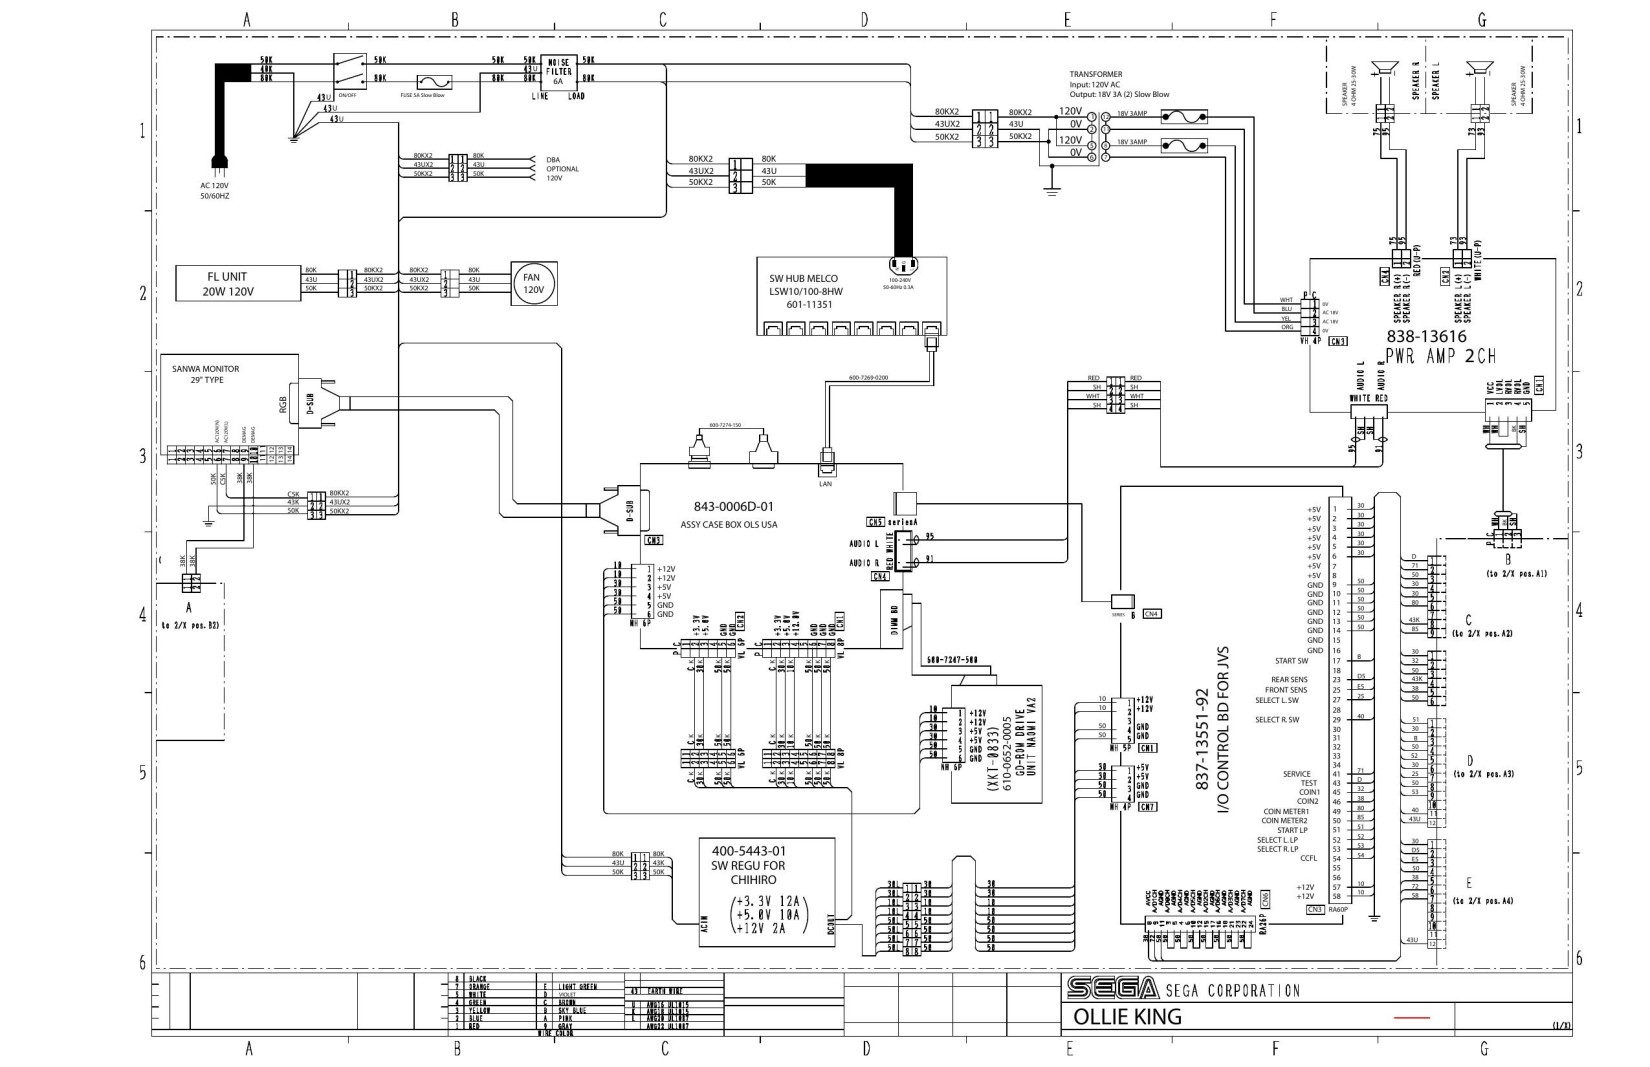 Liberator (SP-209 1st Printing) (Schematic Package) (U)